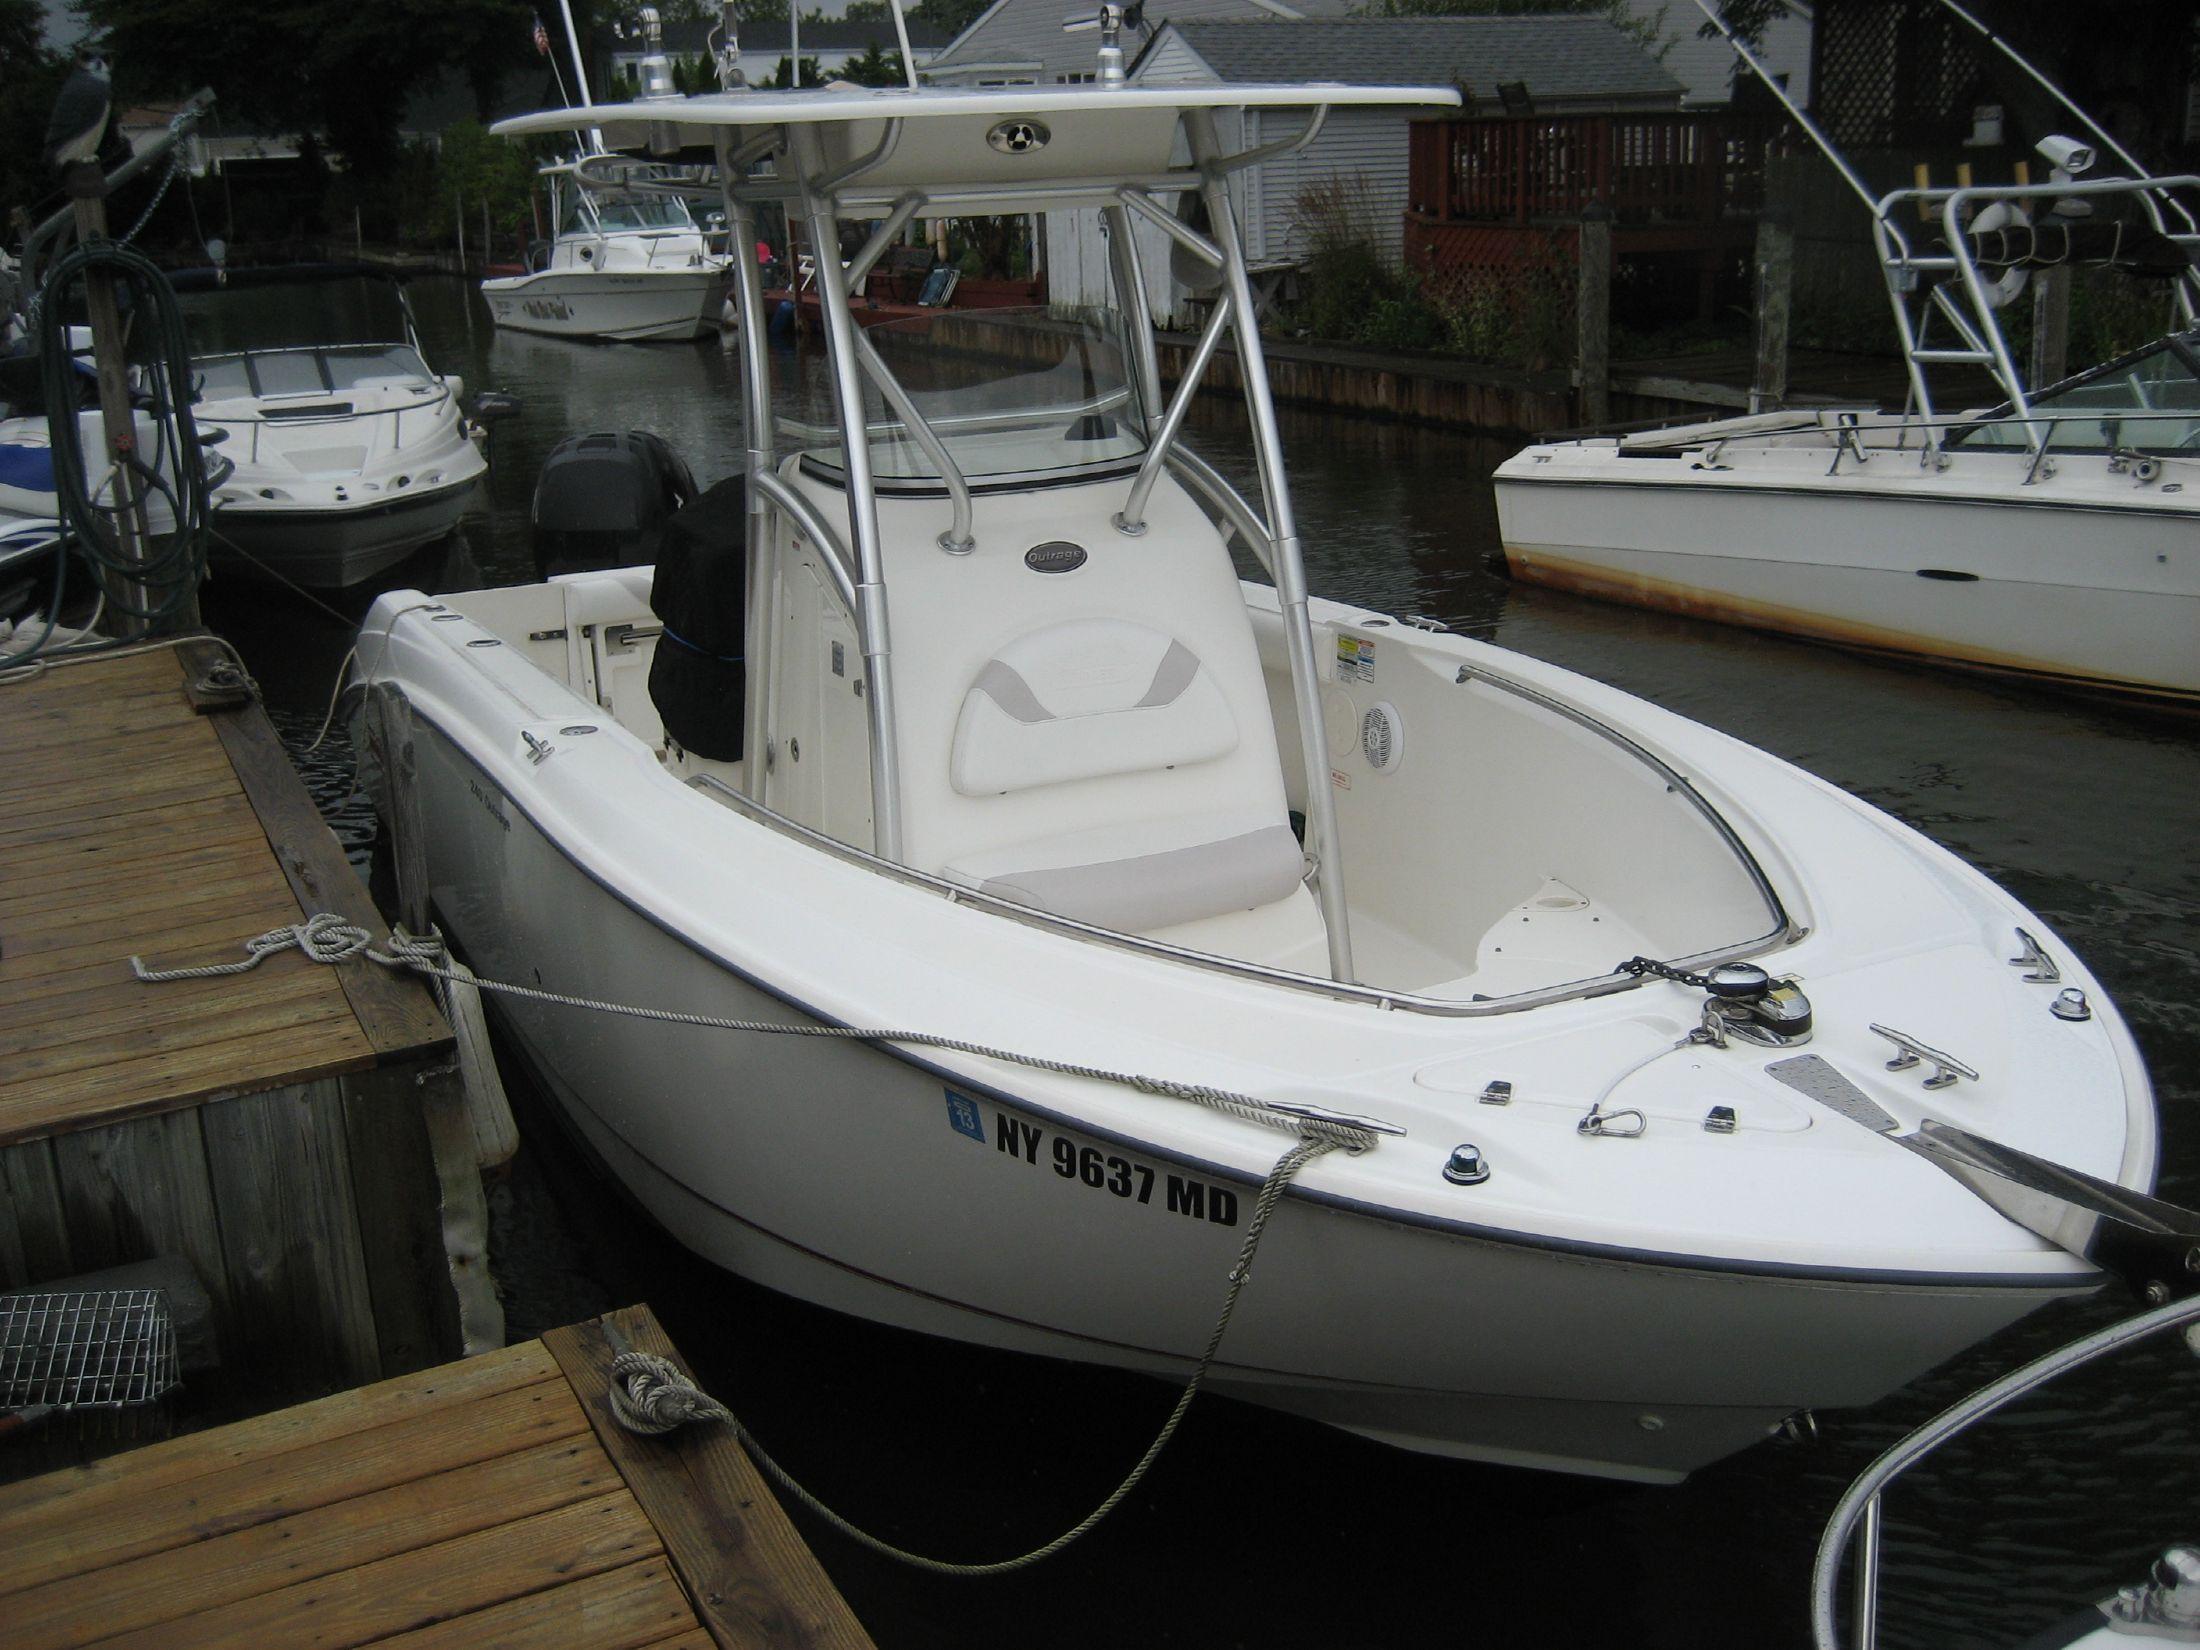 Boston Whaler 240 Outrage (Hard Top, With Trailer), Babylon, Long Island